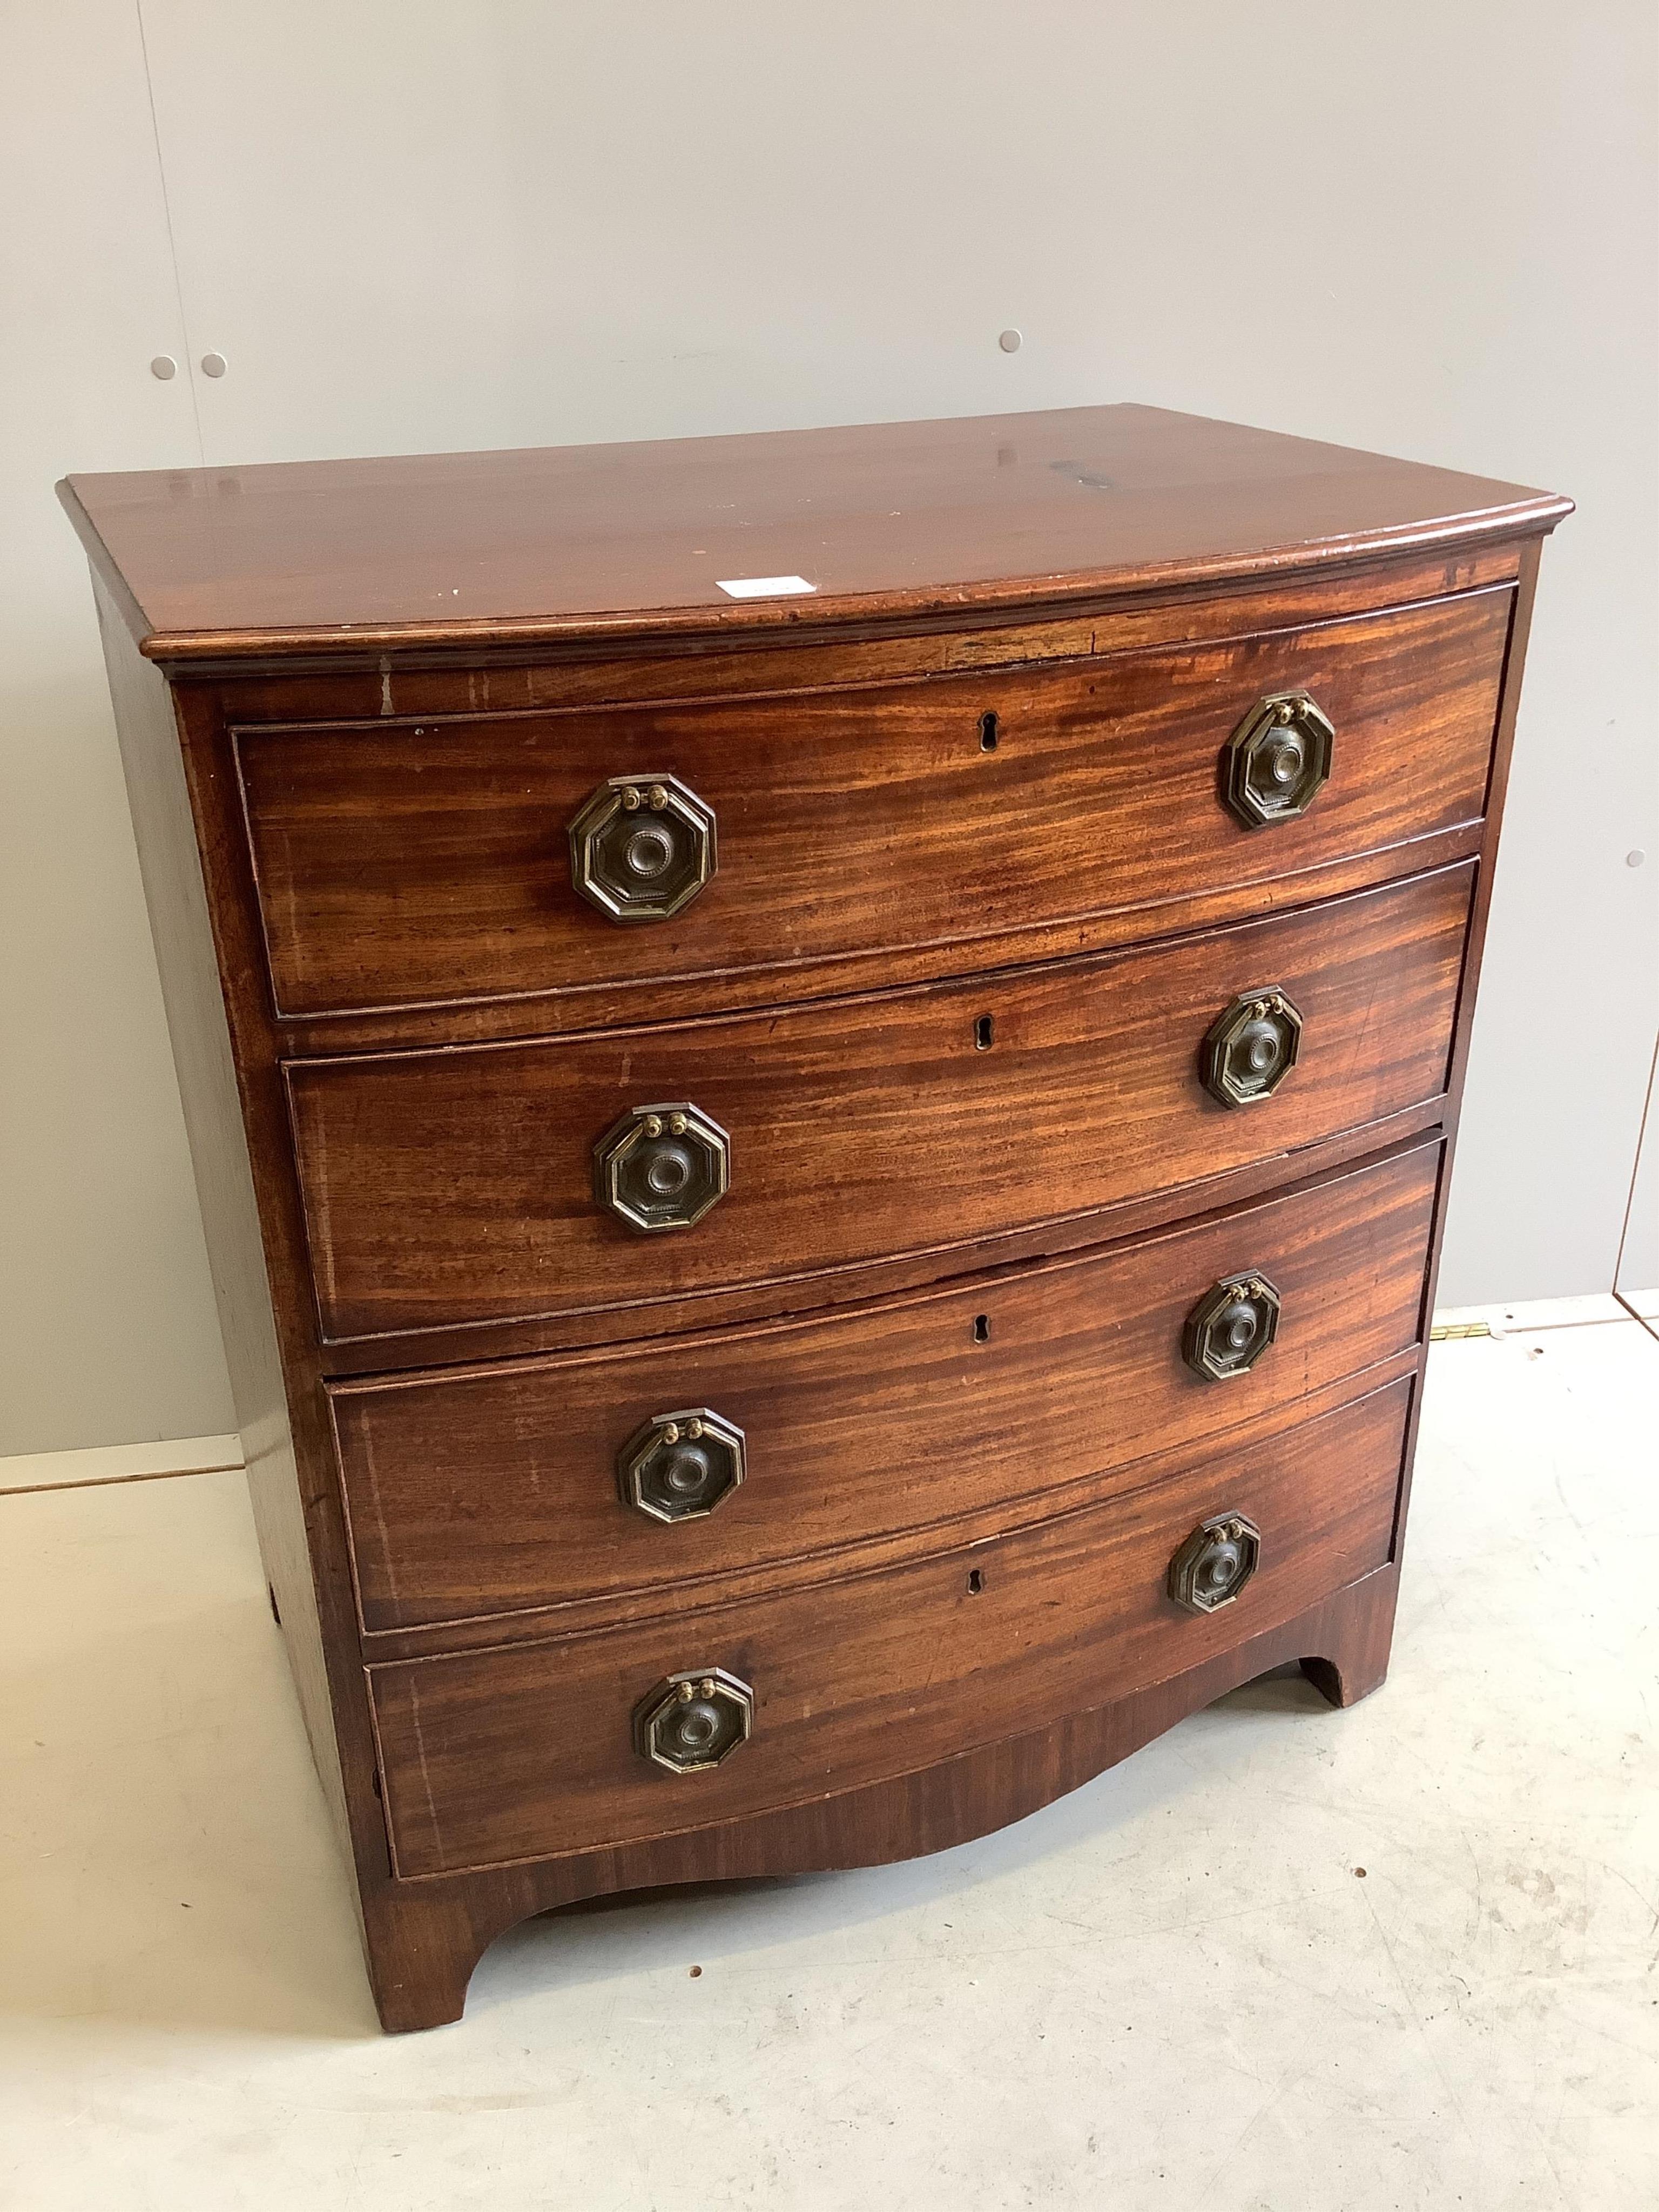 A small Regency mahogany bowfront chest, width 75cm, depth 52cm, height 84cm. Condition - fair